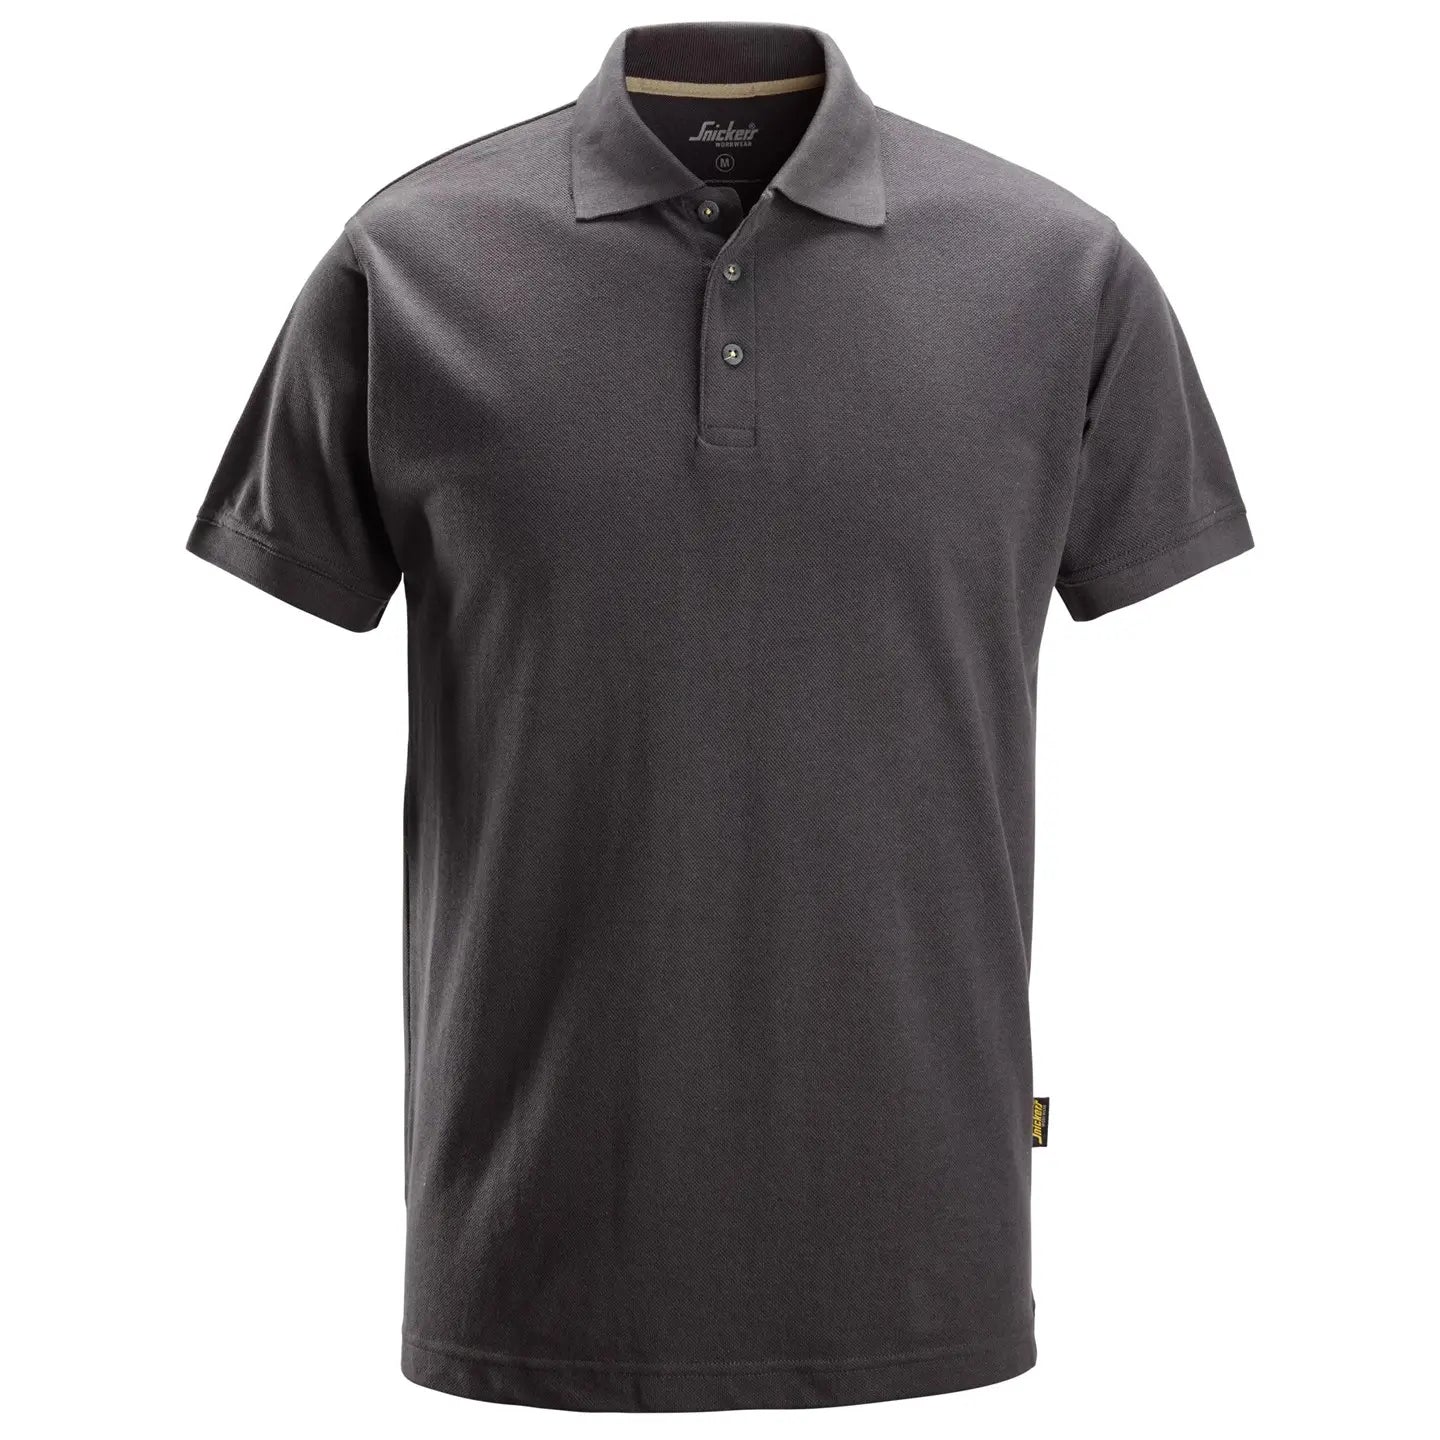 SNICKERS 2718 KLASSISK POLO SHIRT